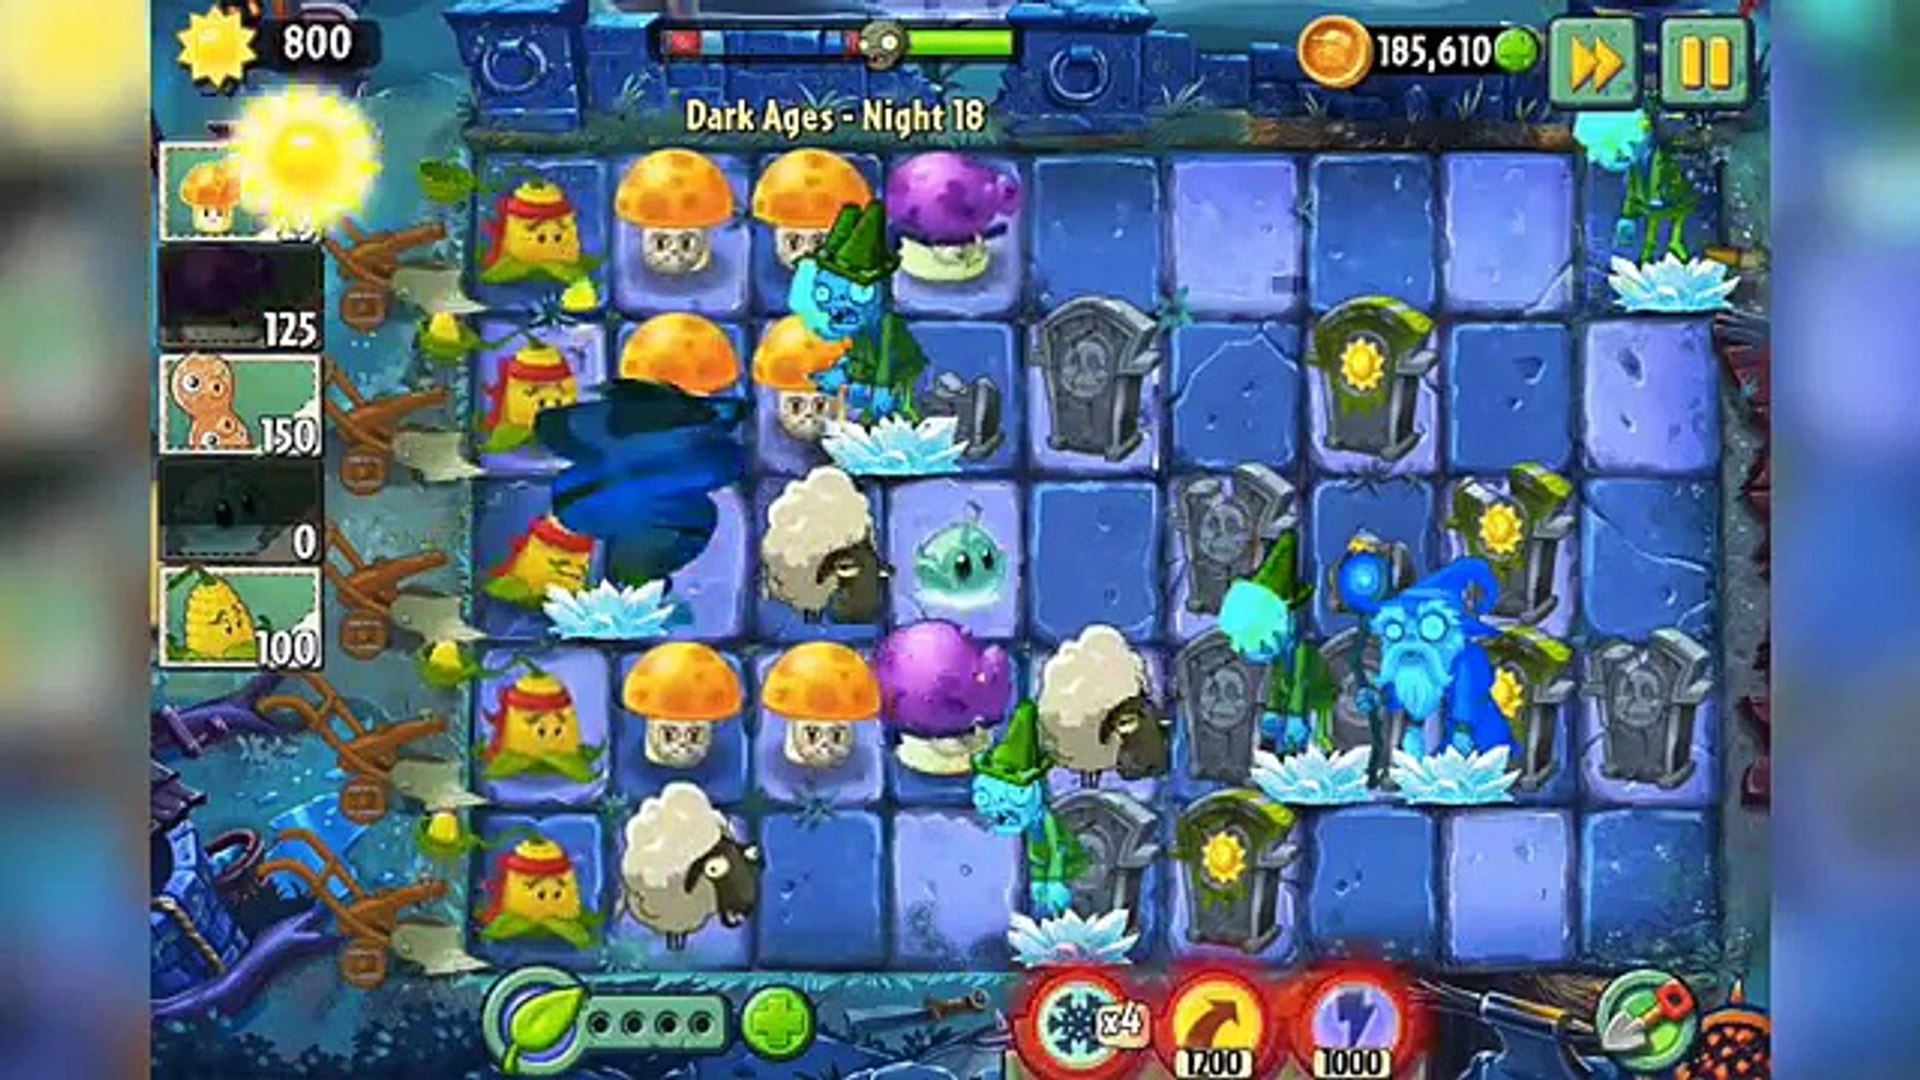 Dark Ages Night 18 Plants Vs Zombies 2 Its About Time Video Dailymotion